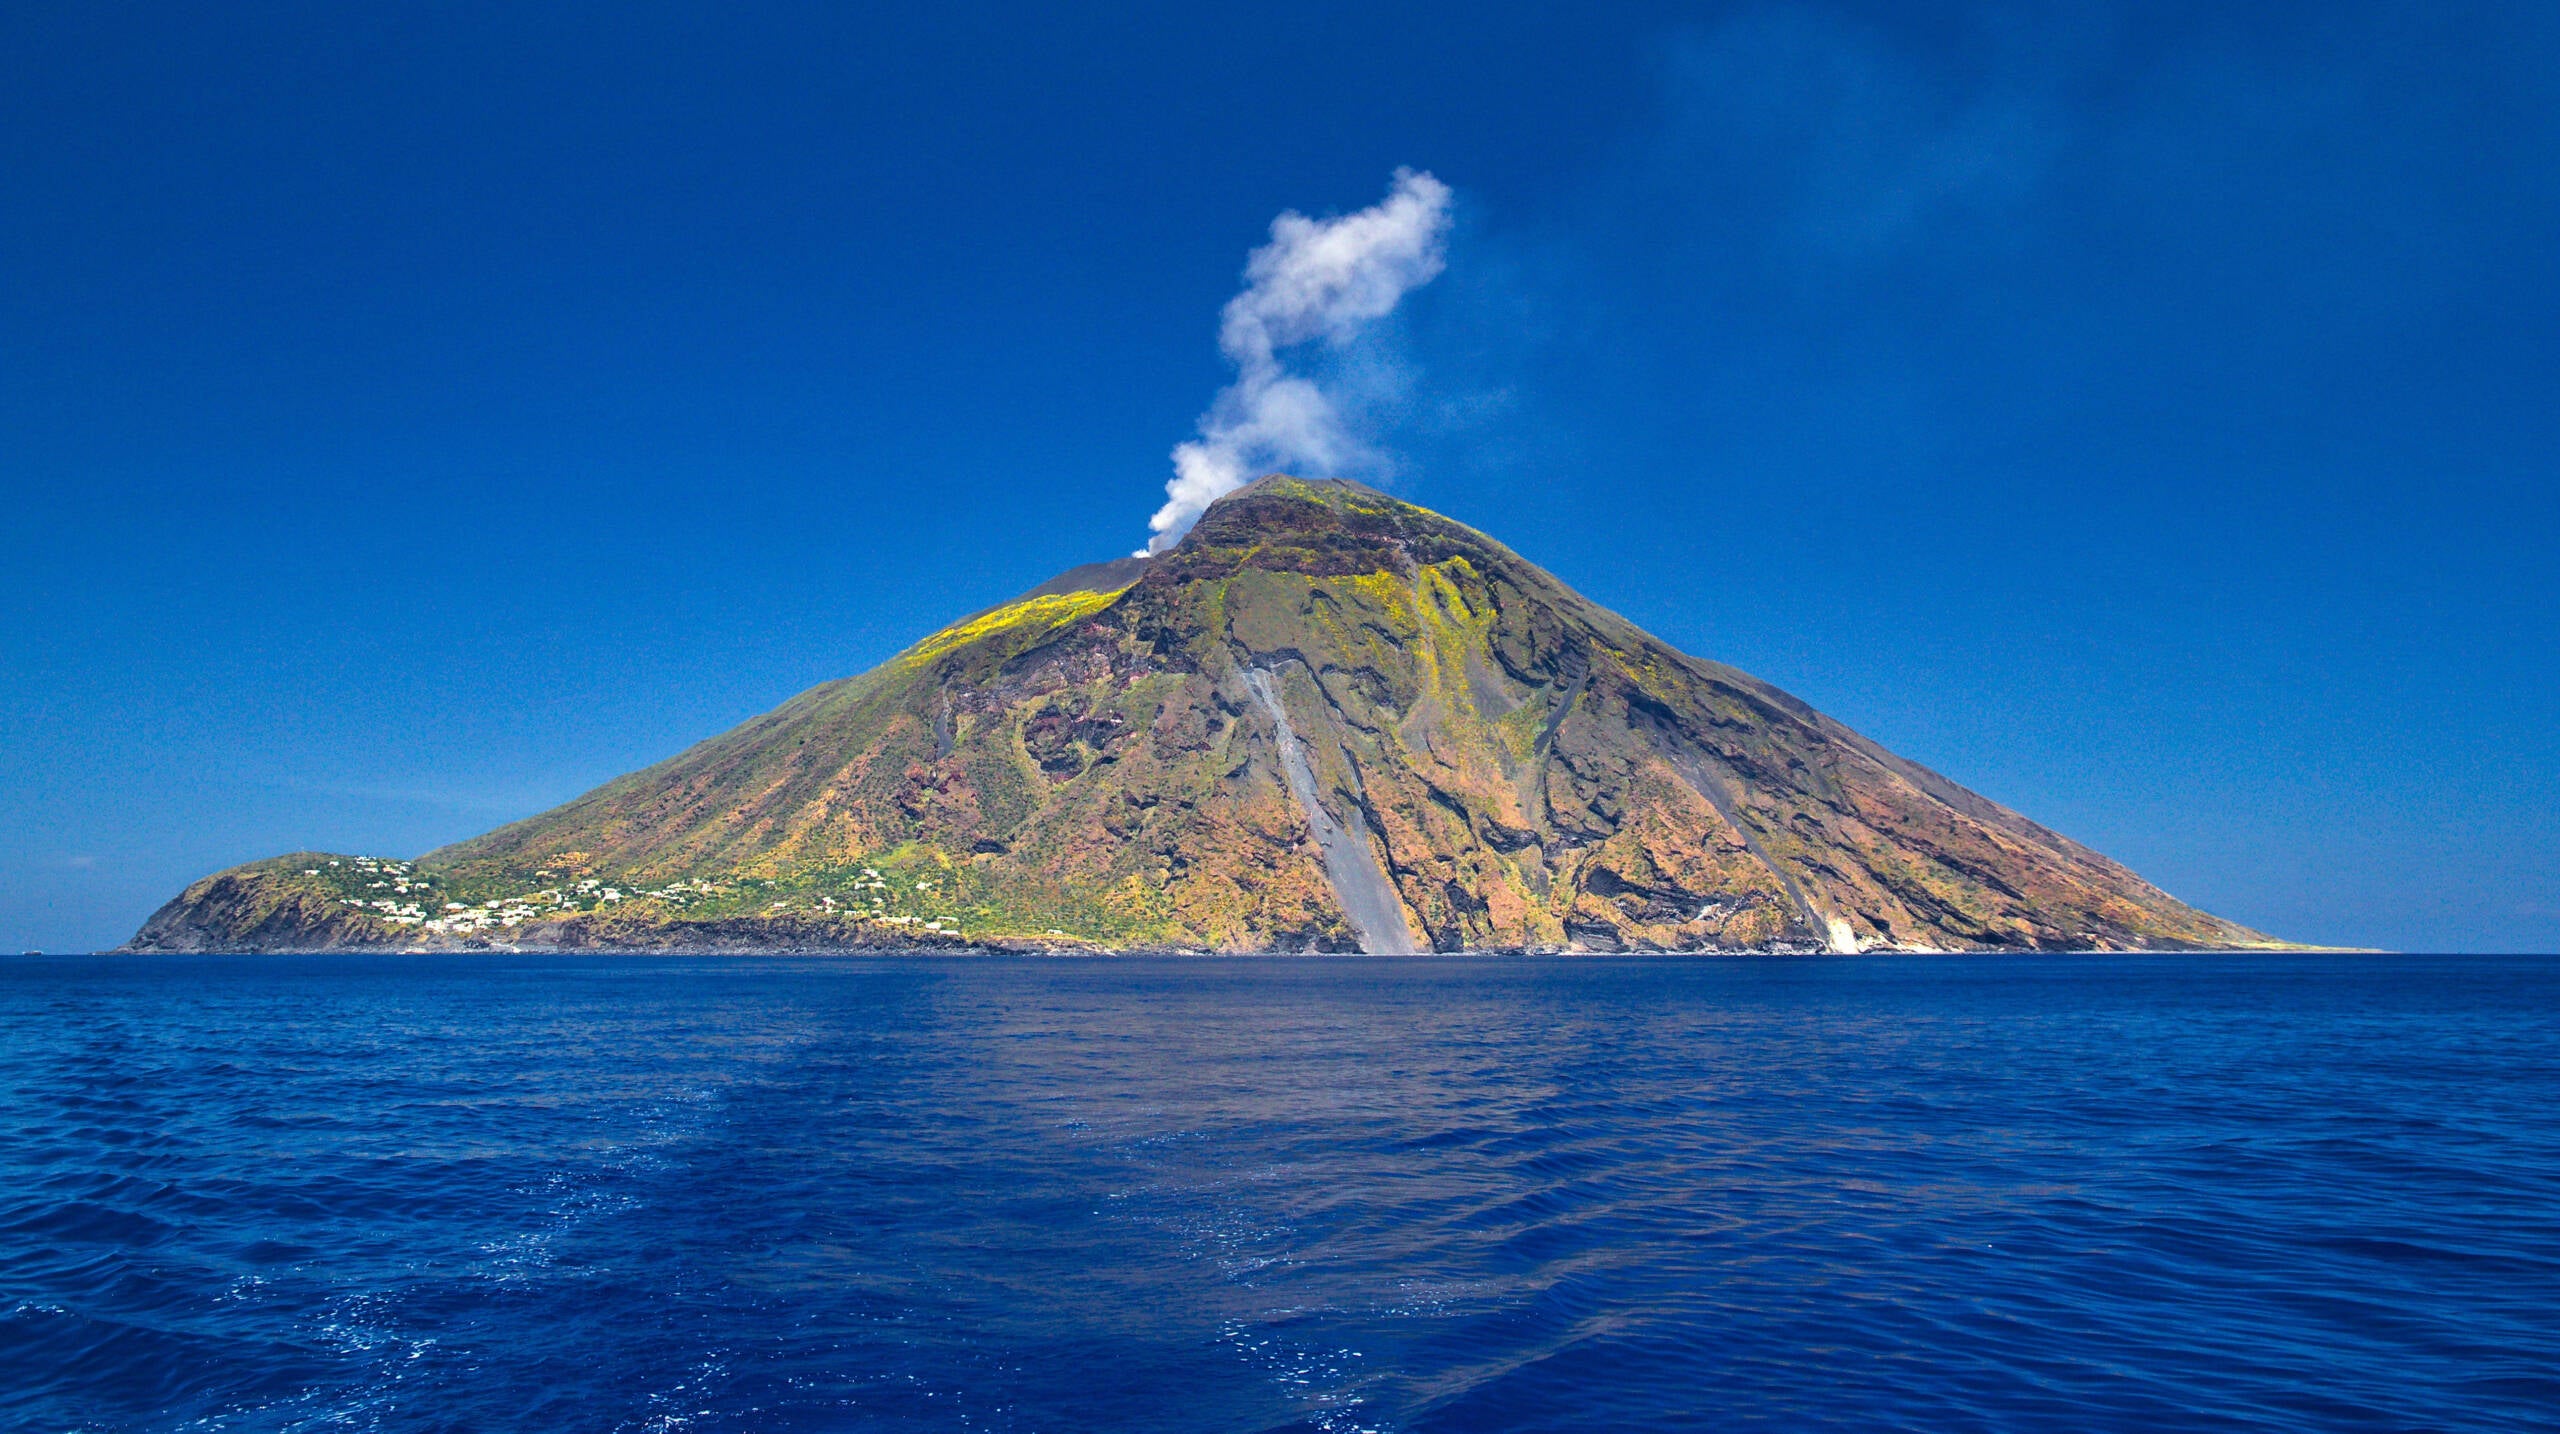 6 reasons to visit Italy's Aeolian Islands - The Points Guy